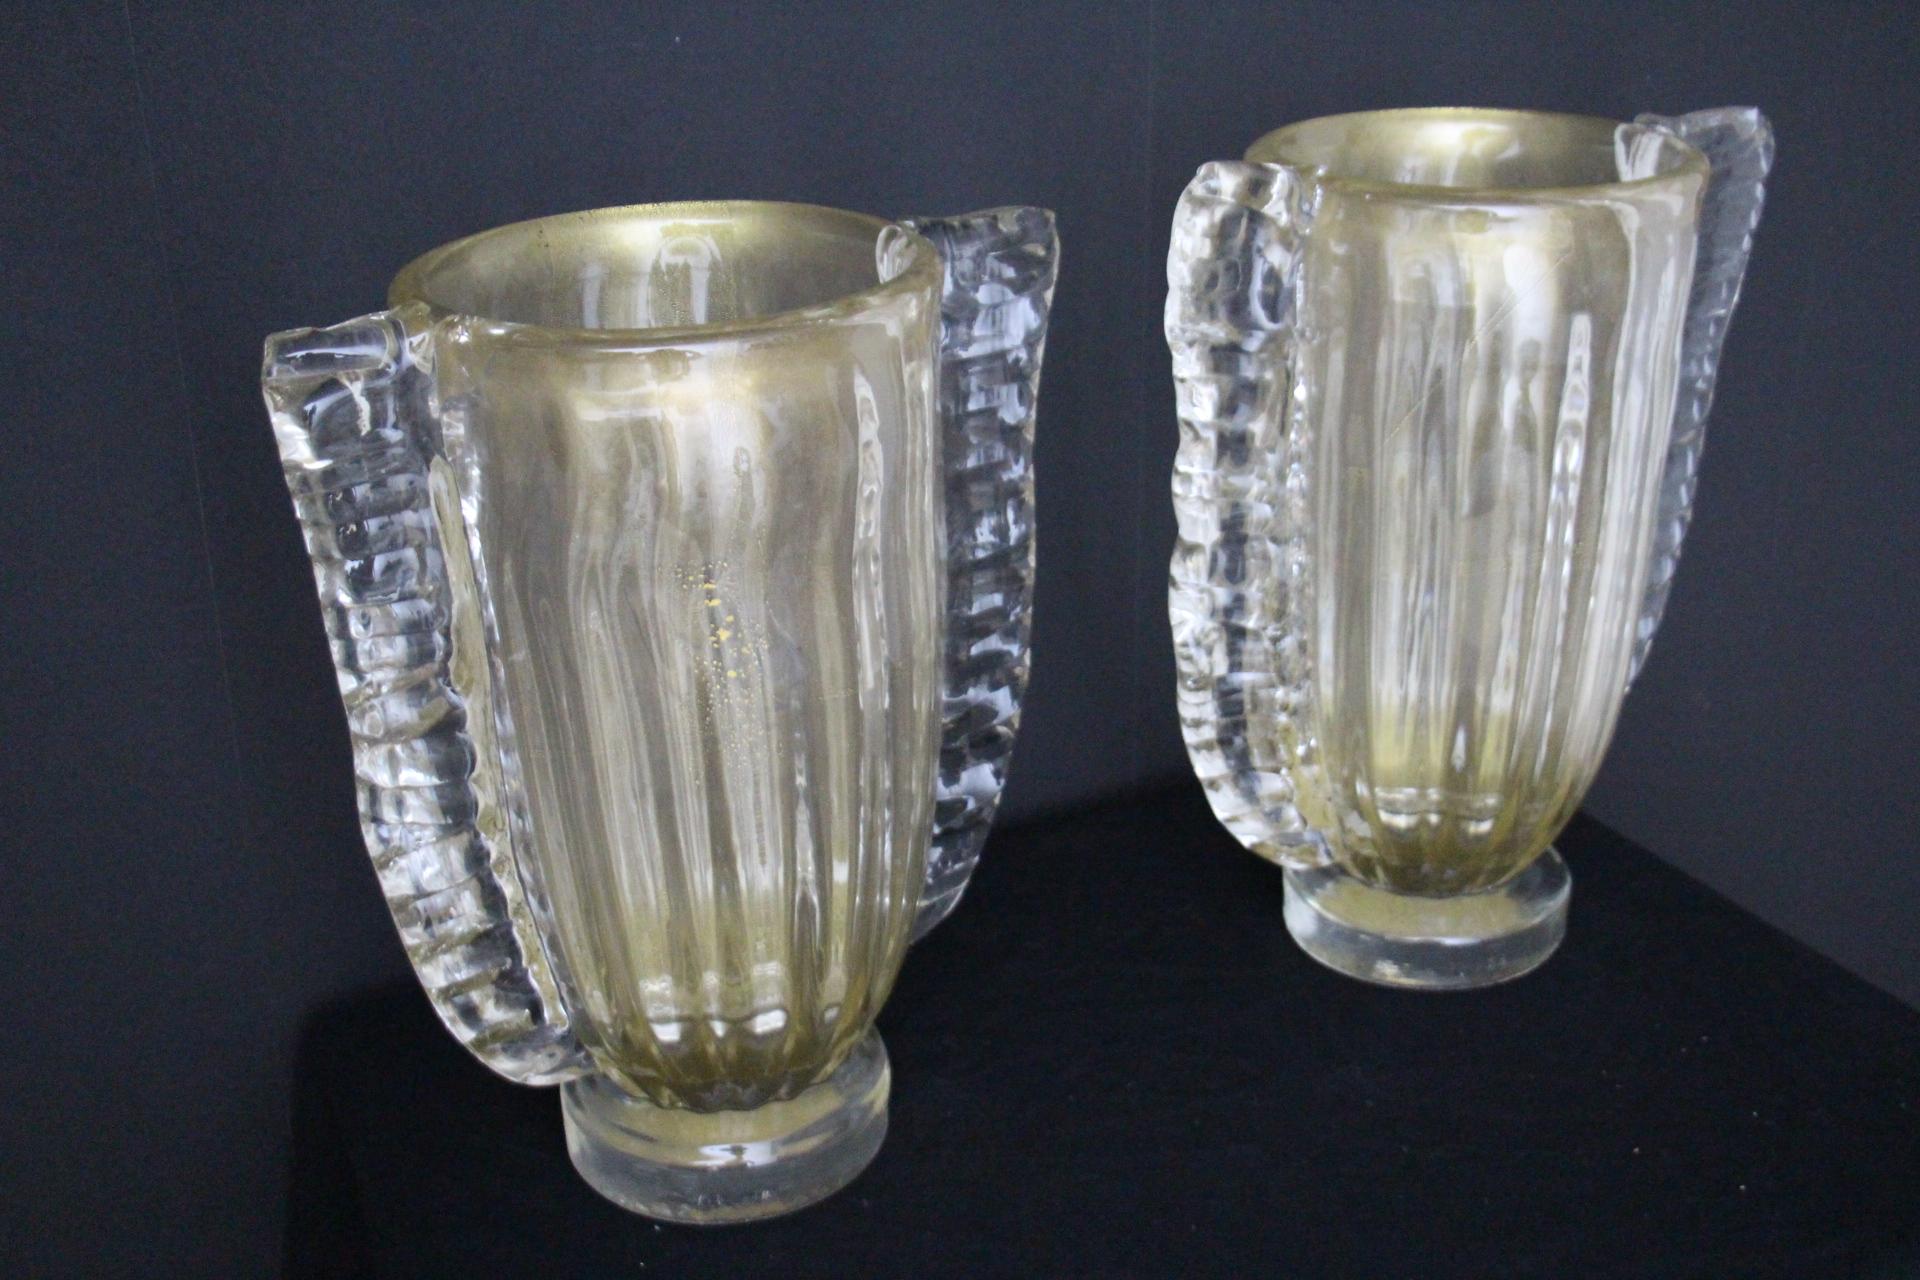 This spectacular pair of vases has got a very unusual golden according to surrounding colors and light. This special effect is due to deep gold dust inclusions in glass.On each side, they feature generous glass scallops in crystal color.Their